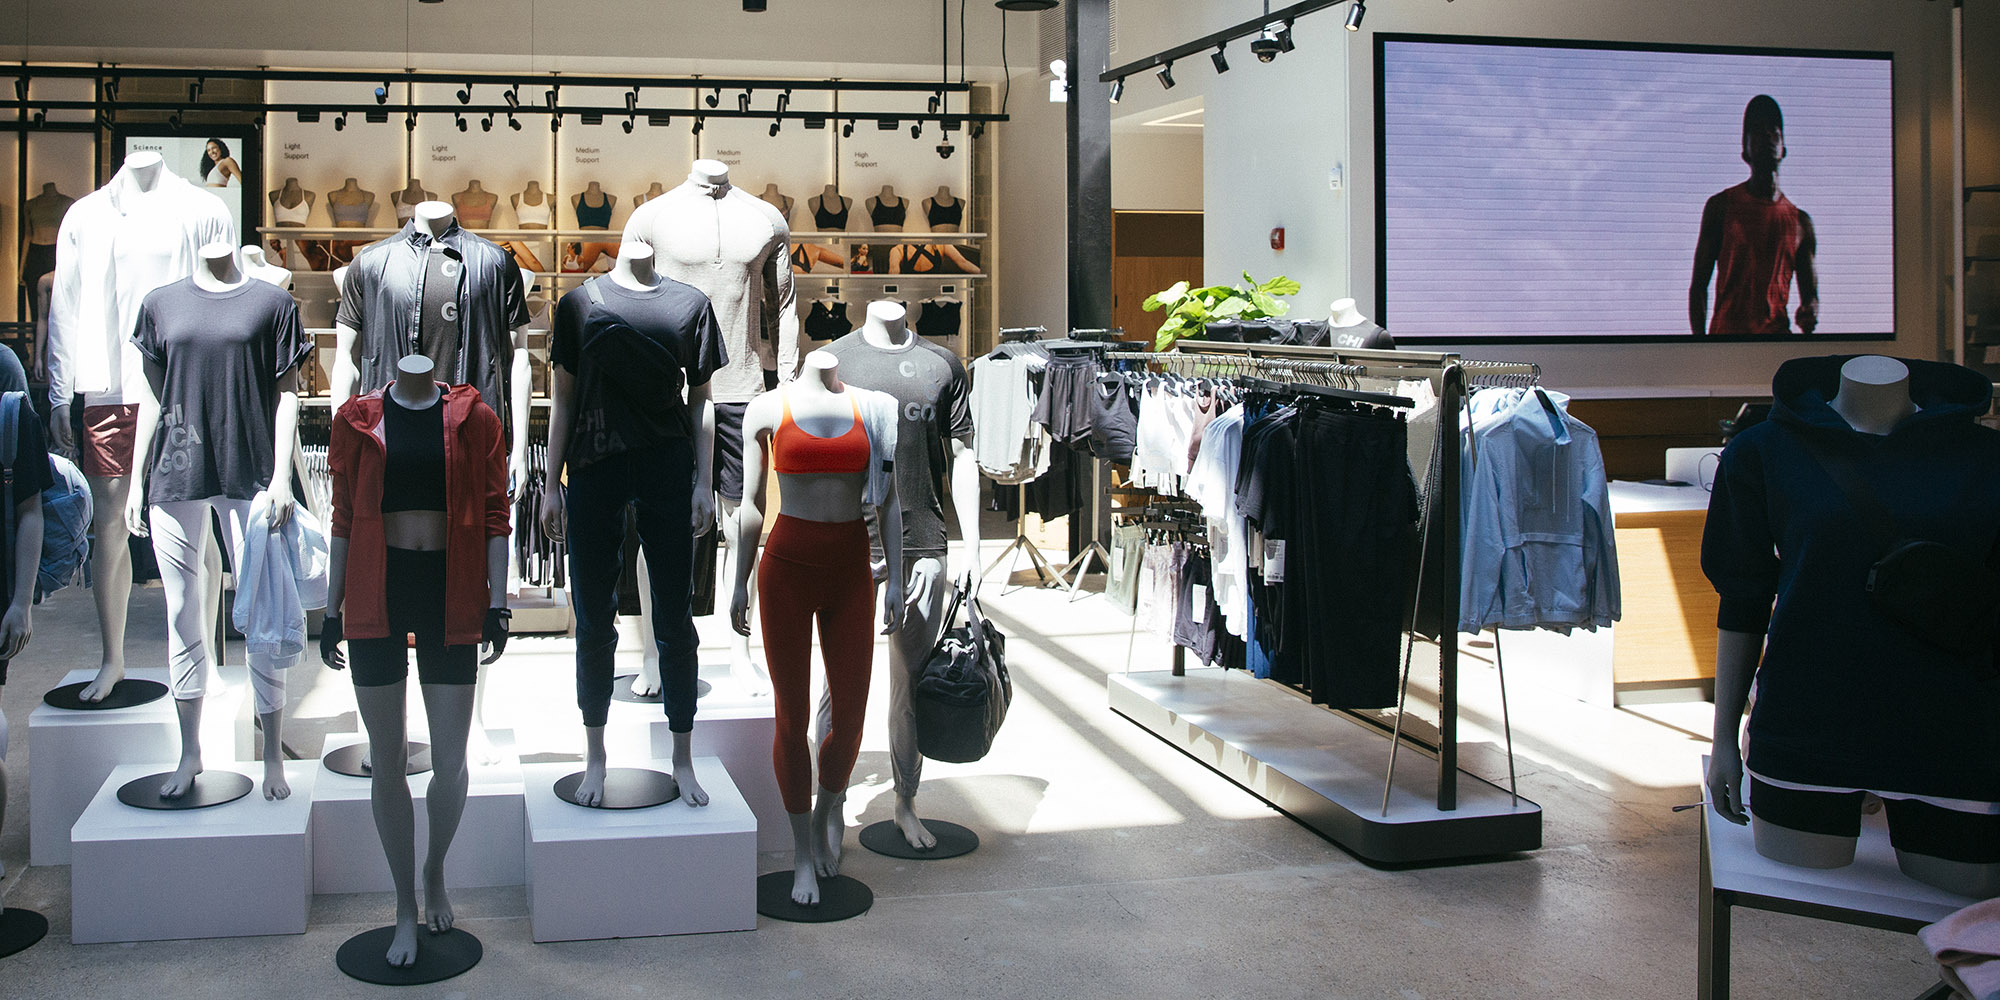 Lululemon supporting employee well-being amid pandemic